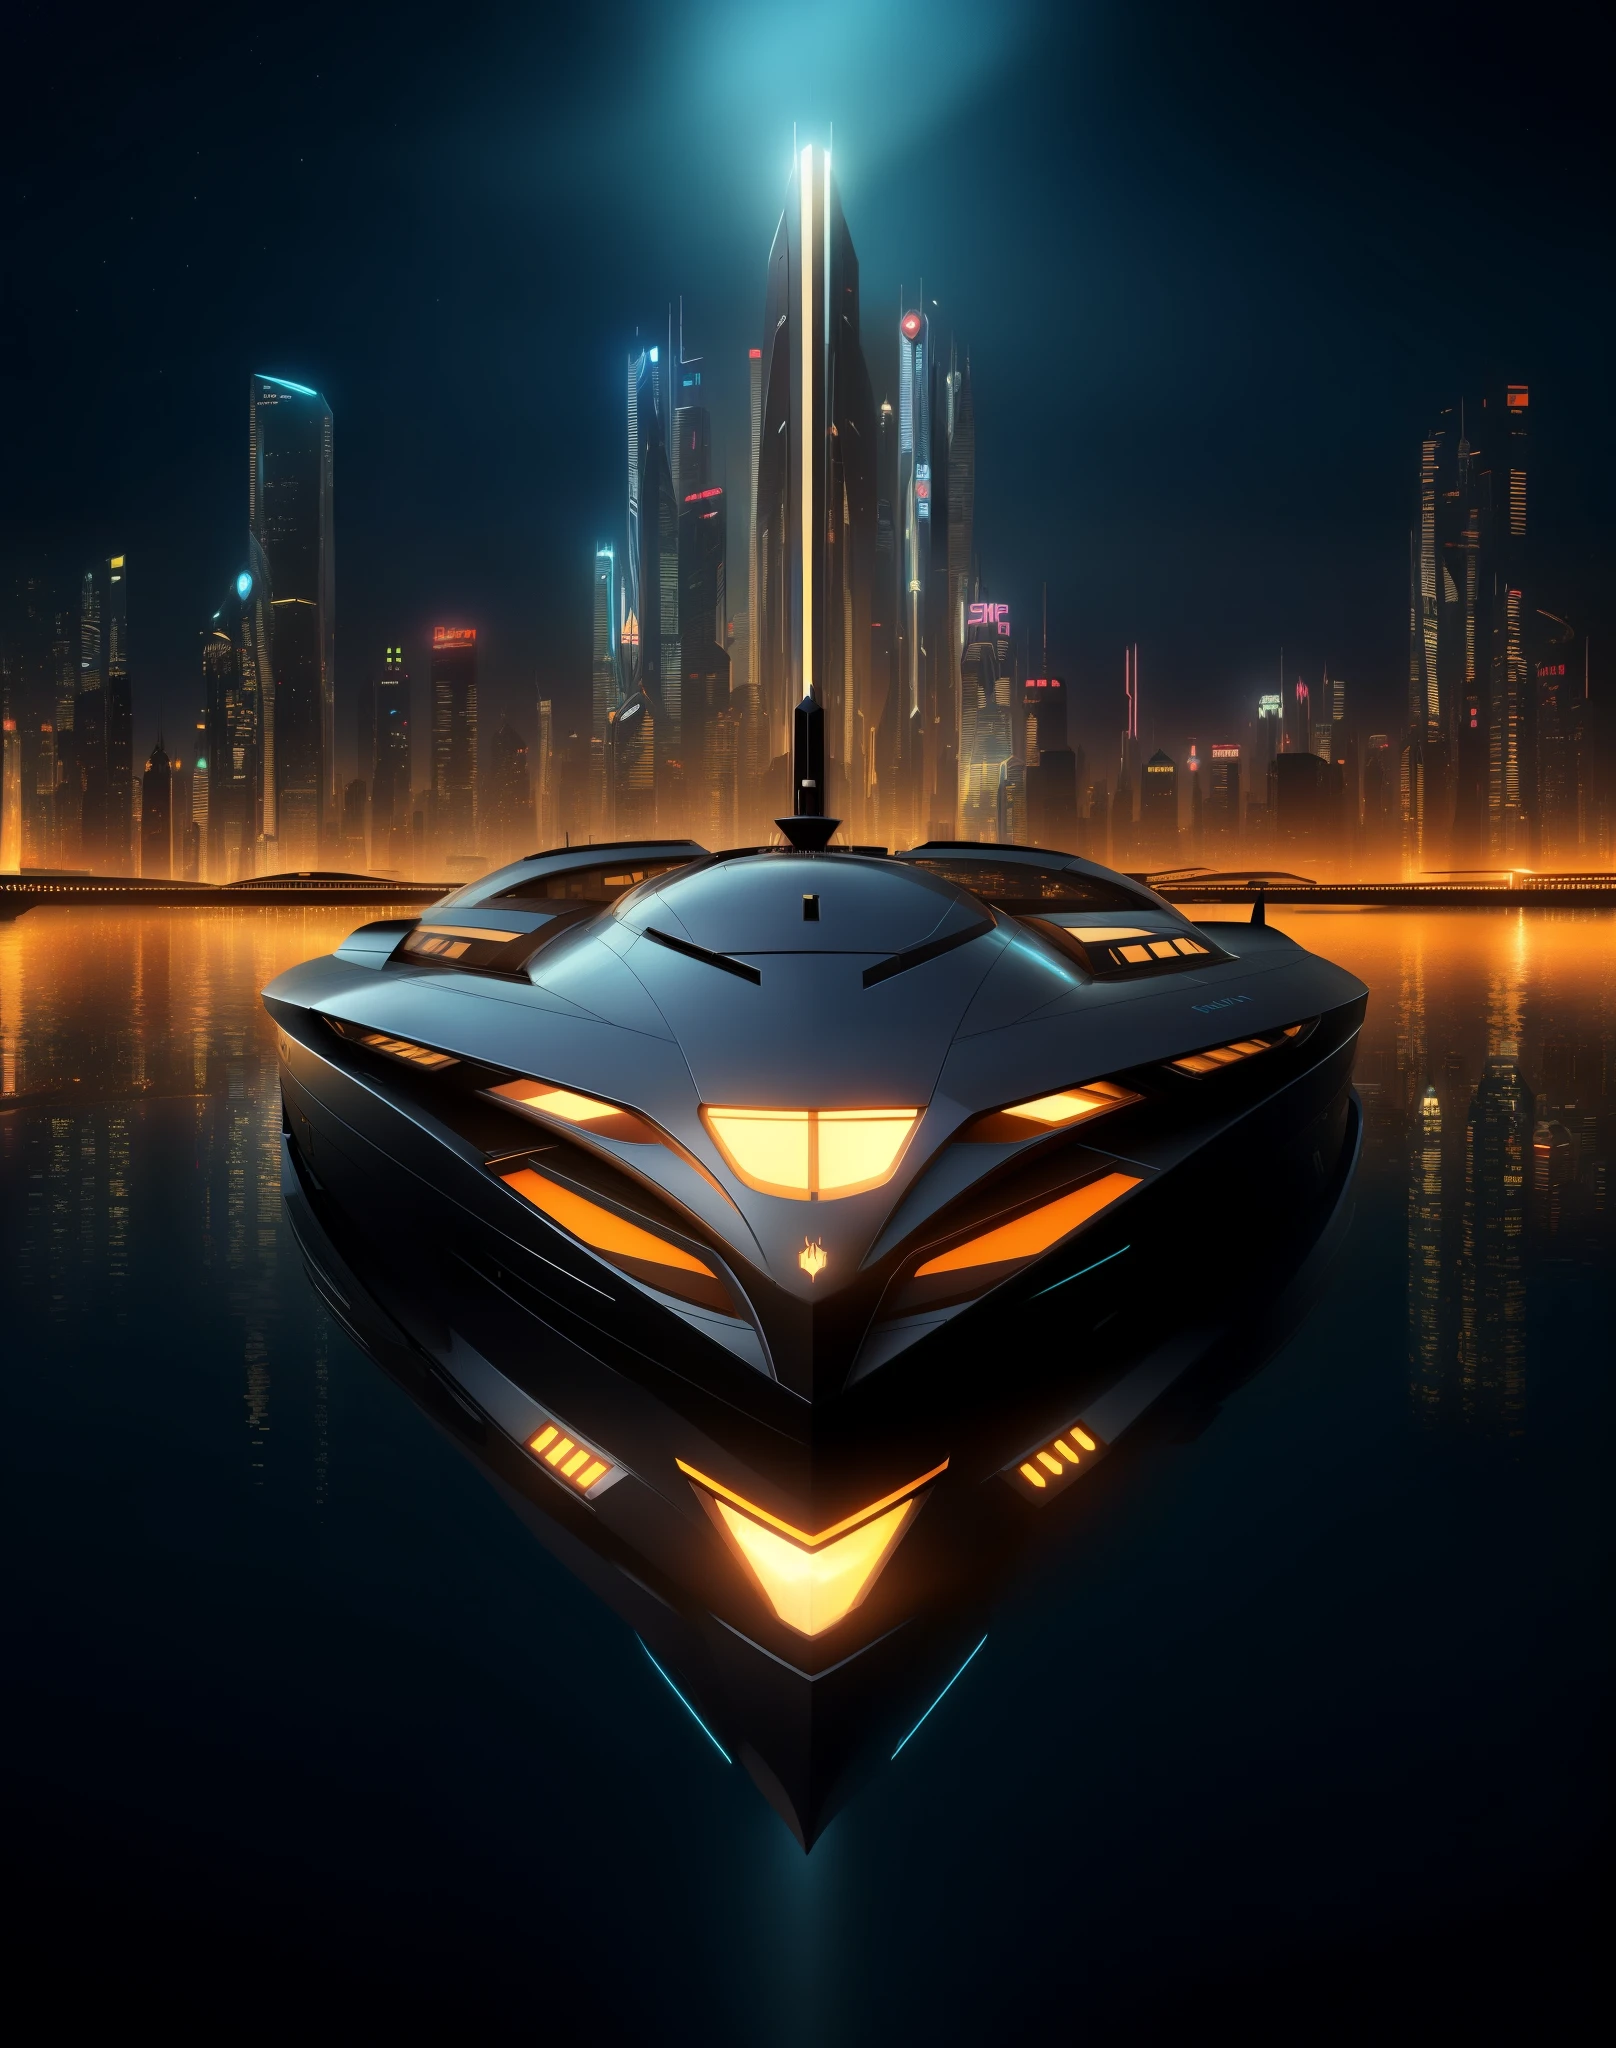 a close up of a boat in the water with a city in the background, cyberpunk speedboat, an iron man concept yacht, concept boat, style of raymond swanland, futuristic digital art, futuristic concept art, very futuristic, futuristic poster, art deco sci fi, in a futuristic city, futuristic digital painting, futuristic art, futuristic setting, high quality digital concept art